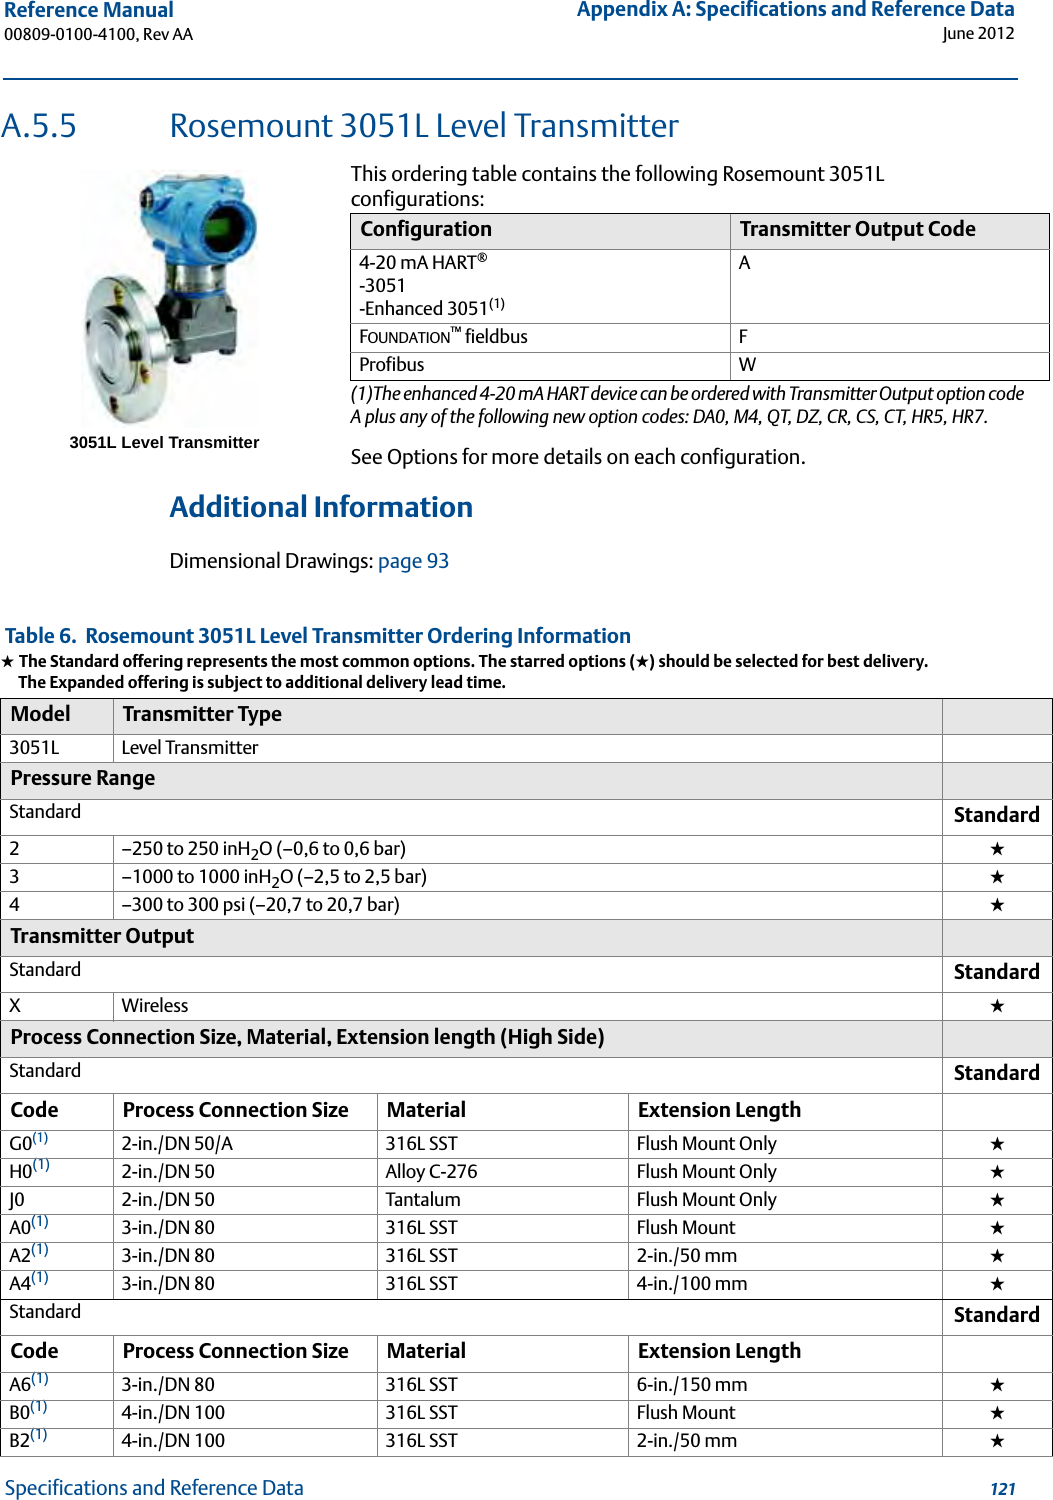 121Reference Manual 00809-0100-4100, Rev AAAppendix A: Specifications and Reference DataJune 2012Specifications and Reference DataA.5.5 Rosemount 3051L Level TransmitterThis ordering table contains the following Rosemount 3051L configurations:See Options for more details on each configuration. Additional InformationDimensional Drawings: page 93Configuration Transmitter Output Code4-20 mA HART®-3051-Enhanced 3051(1)(1)The enhanced 4-20 mA HART device can be ordered with Transmitter Output option code A plus any of the following new option codes: DA0, M4, QT, DZ, CR, CS, CT, HR5, HR7.AFOUNDATION™ fieldbus FProfibus W Table 6.  Rosemount 3051L Level Transmitter Ordering Information★ The Standard offering represents the most common options. The starred options (★) should be selected for best delivery.__The Expanded offering is subject to additional delivery lead time.Model Transmitter Type3051L Level TransmitterPressure RangeStandard Standard2–250 to 250 inH2O (–0,6 to 0,6 bar) ★3–1000 to 1000 inH2O (–2,5 to 2,5 bar) ★4–300 to 300 psi (–20,7 to 20,7 bar) ★Transmitter OutputStandard StandardXWireless ★Process Connection Size, Material, Extension length (High Side)Standard StandardCode Process Connection Size Material Extension LengthG0(1) 2-in./DN 50/A 316L SST Flush Mount Only ★H0(1) 2-in./DN 50 Alloy C-276 Flush Mount Only ★J0 2-in./DN 50 Tantalum Flush Mount Only ★A0(1) 3-in./DN 80 316L SST Flush Mount ★A2(1) 3-in./DN 80 316L SST 2-in./50 mm ★A4(1) 3-in./DN 80 316L SST 4-in./100 mm ★Standard StandardCode Process Connection Size Material Extension LengthA6(1) 3-in./DN 80 316L SST 6-in./150 mm ★B0(1) 4-in./DN 100 316L SST Flush Mount ★B2(1) 4-in./DN 100 316L SST 2-in./50 mm ★3051L Level Transmitter